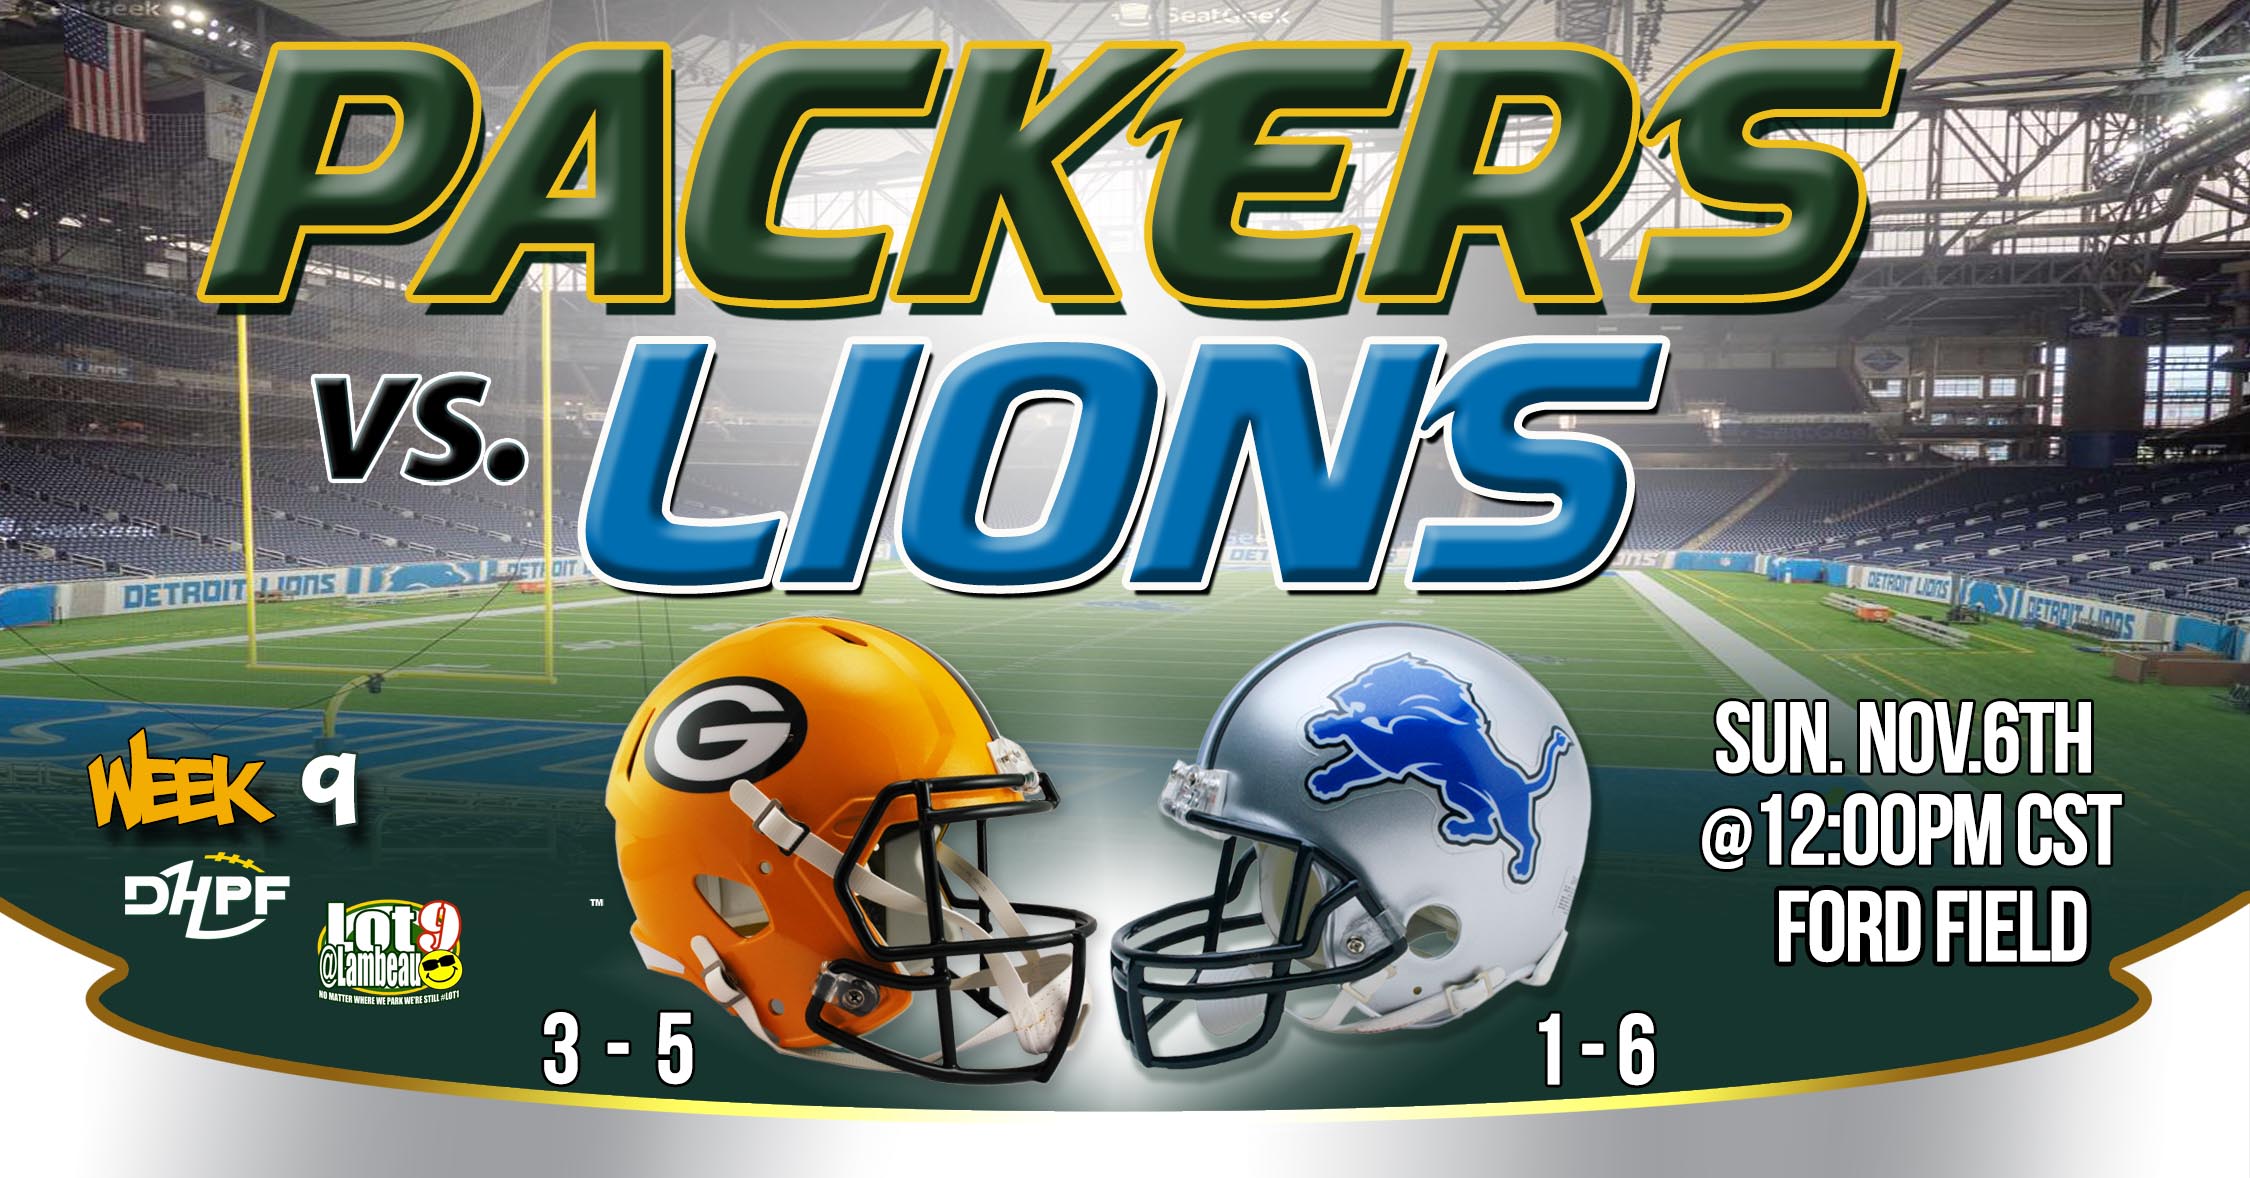 The Packers look to get back into the win column as they face